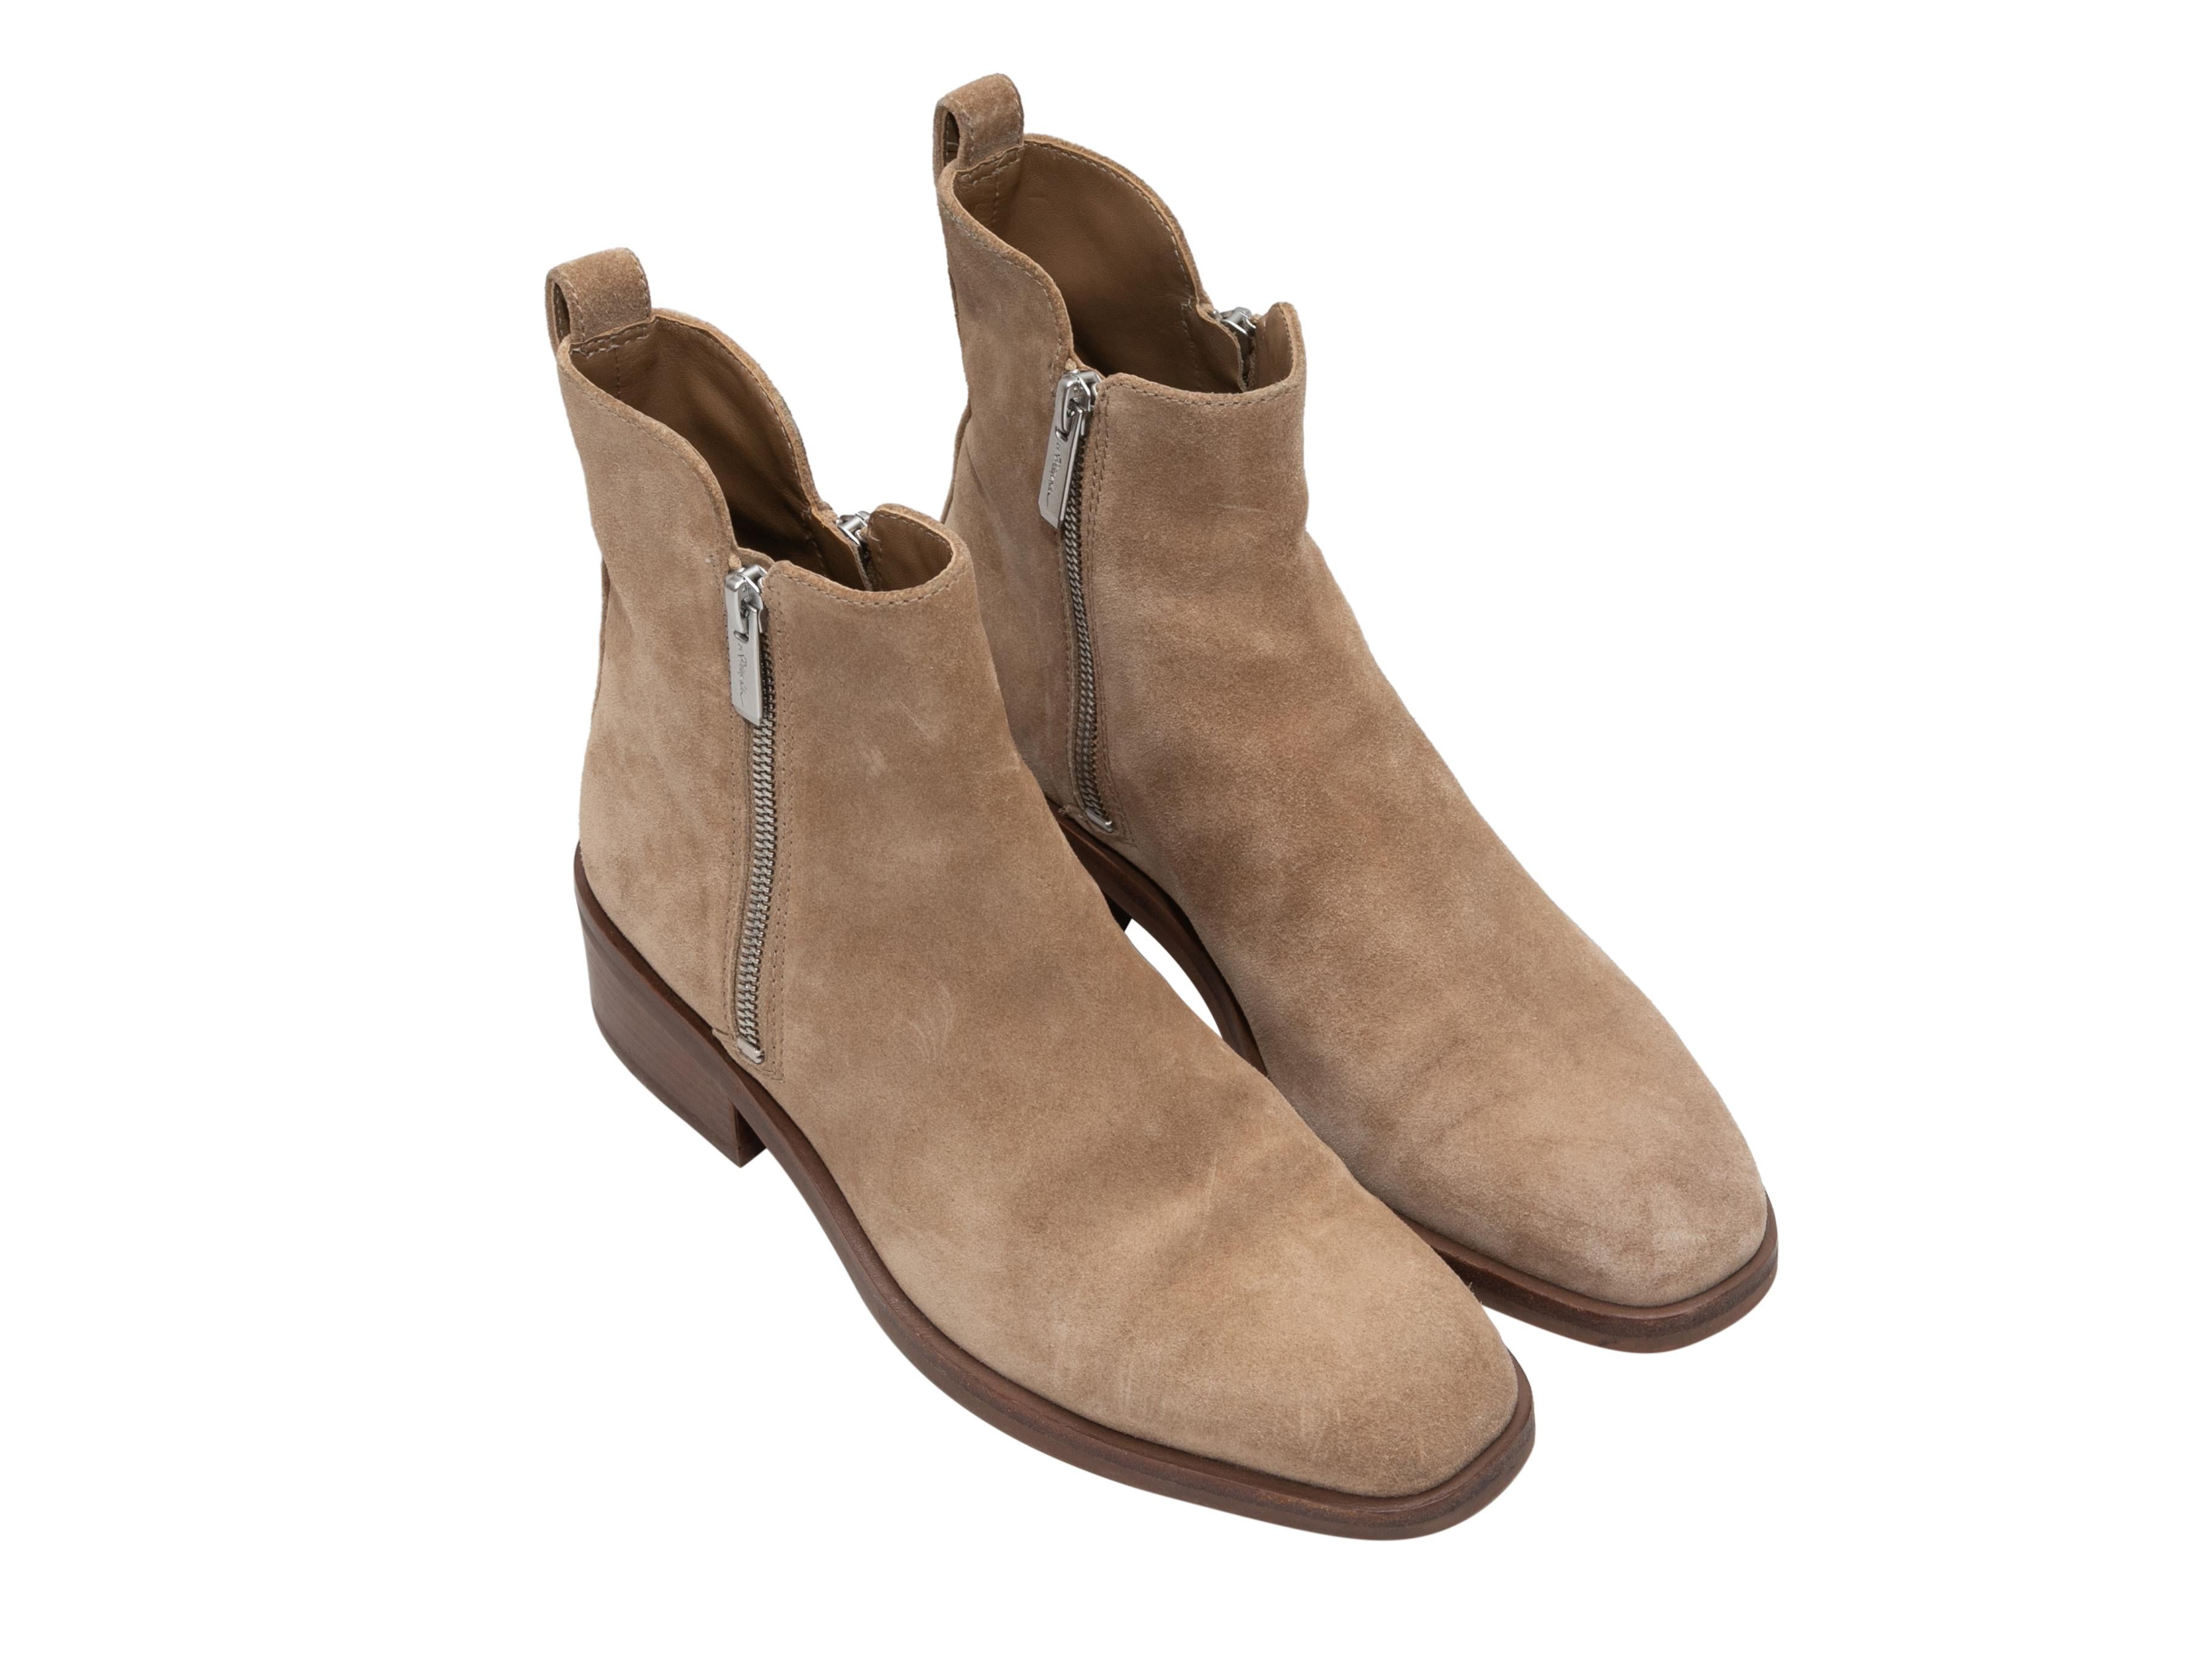 Beige suede flat ankle boots by 3.1 Phillip Lim. Stacked heels. Zip closures at sides. 5.5